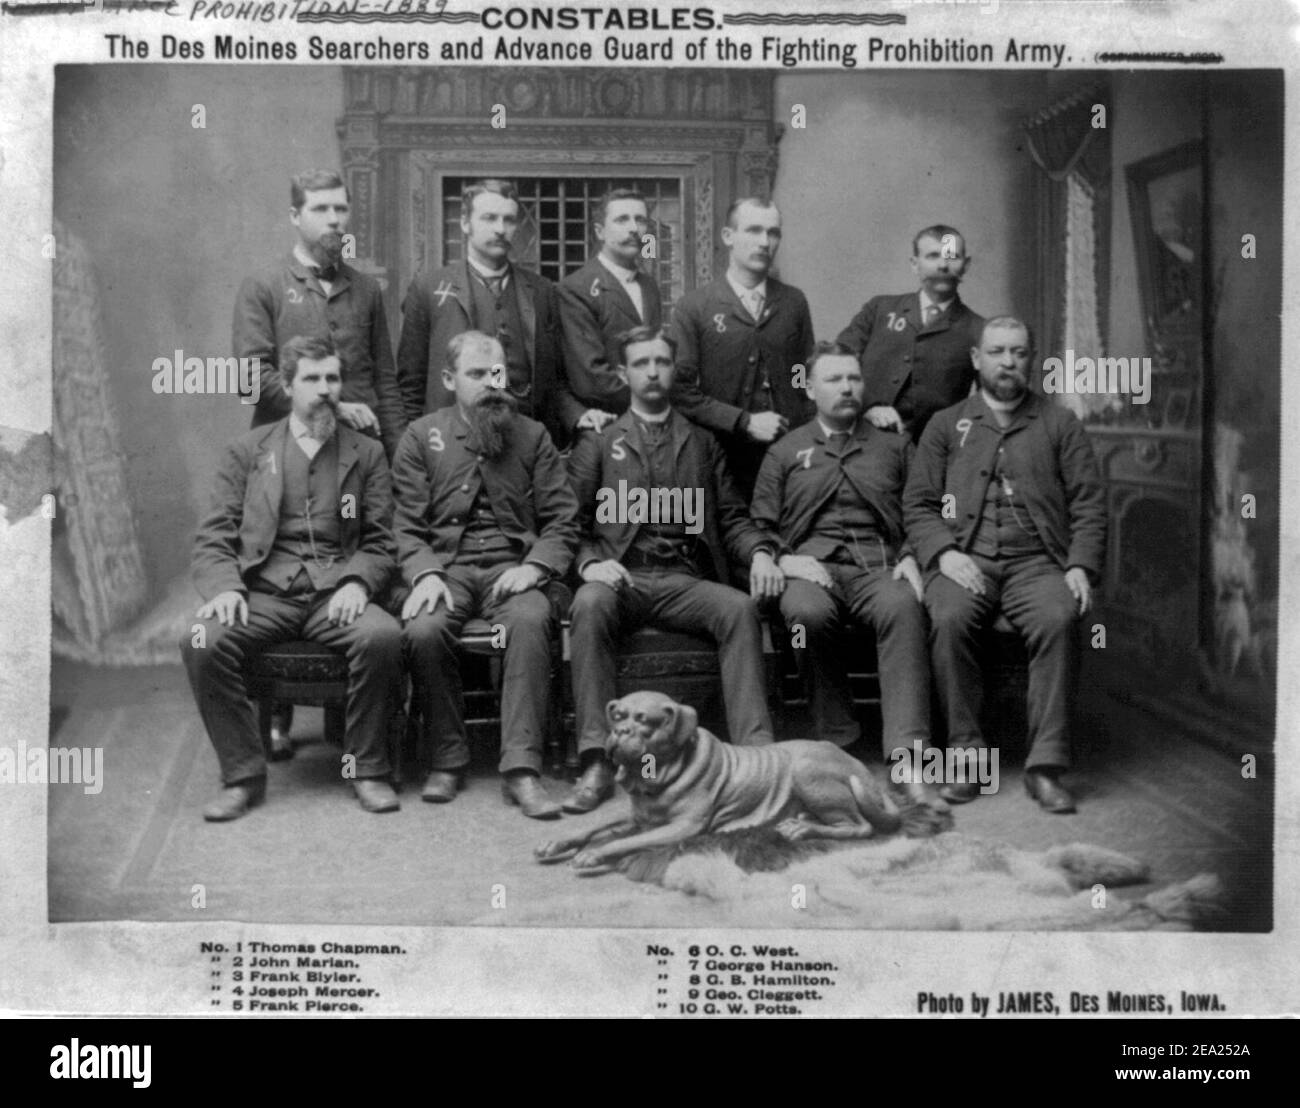 Constables the Des Moines Searchers and Advance Guard of the Fighting Prohibition Army.  Photograph shows group portrait of constables: Thomas Chapman, John Marian, Frank Blyler, Joseph Mercer, Frank Pierce, O.C. West, George Hanson, G.B. Hamilton, George Cleggett and G.W. Potts, posed with bloodhound, circa 1889 Stock Photo